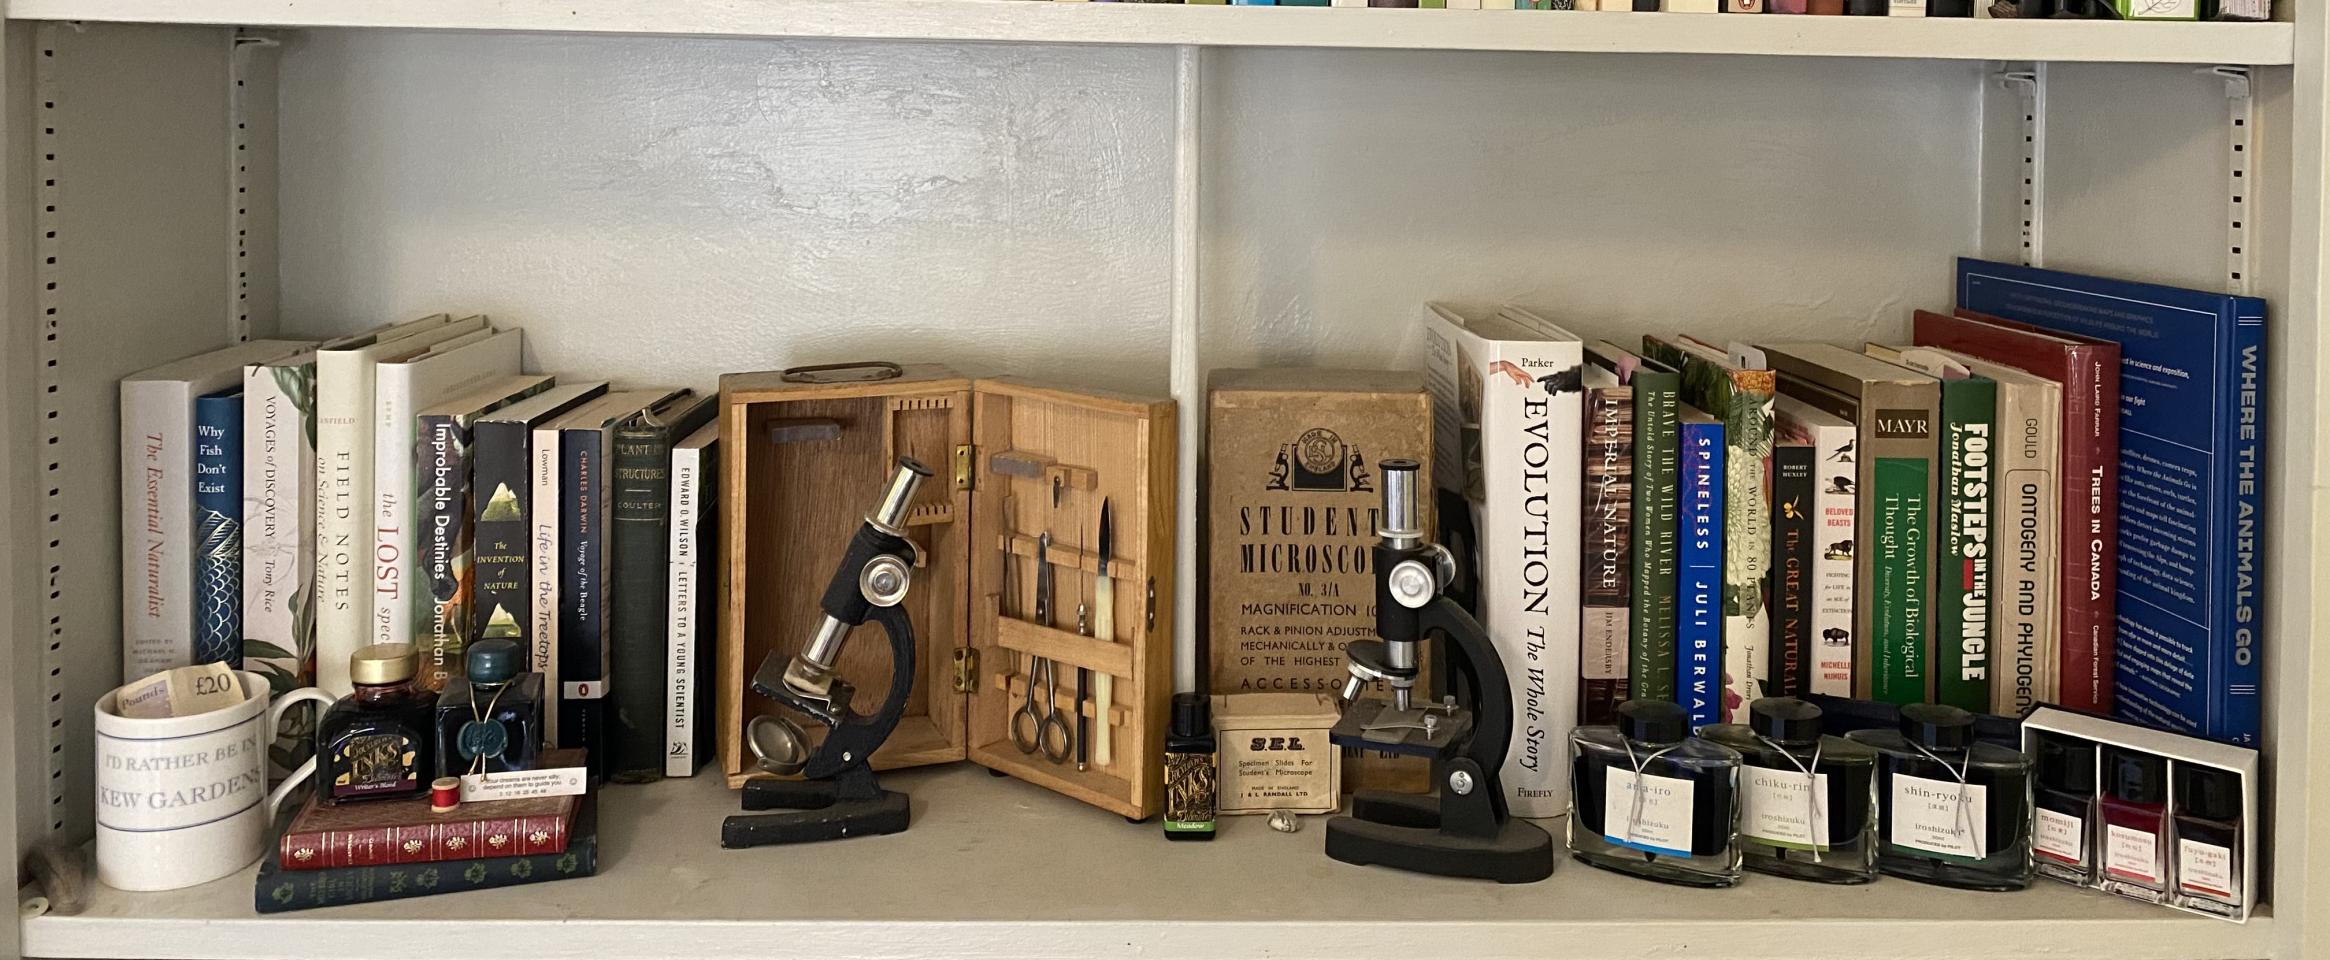 Rectangular photo of Erin Zimmerman’s office bookshelf showing works on botany, trees, naturalists, evolution, ontogeny and phylogeny, Darwin, and evolution, along with two antique student microscopes. Photo credit: Erin Zimmerman.